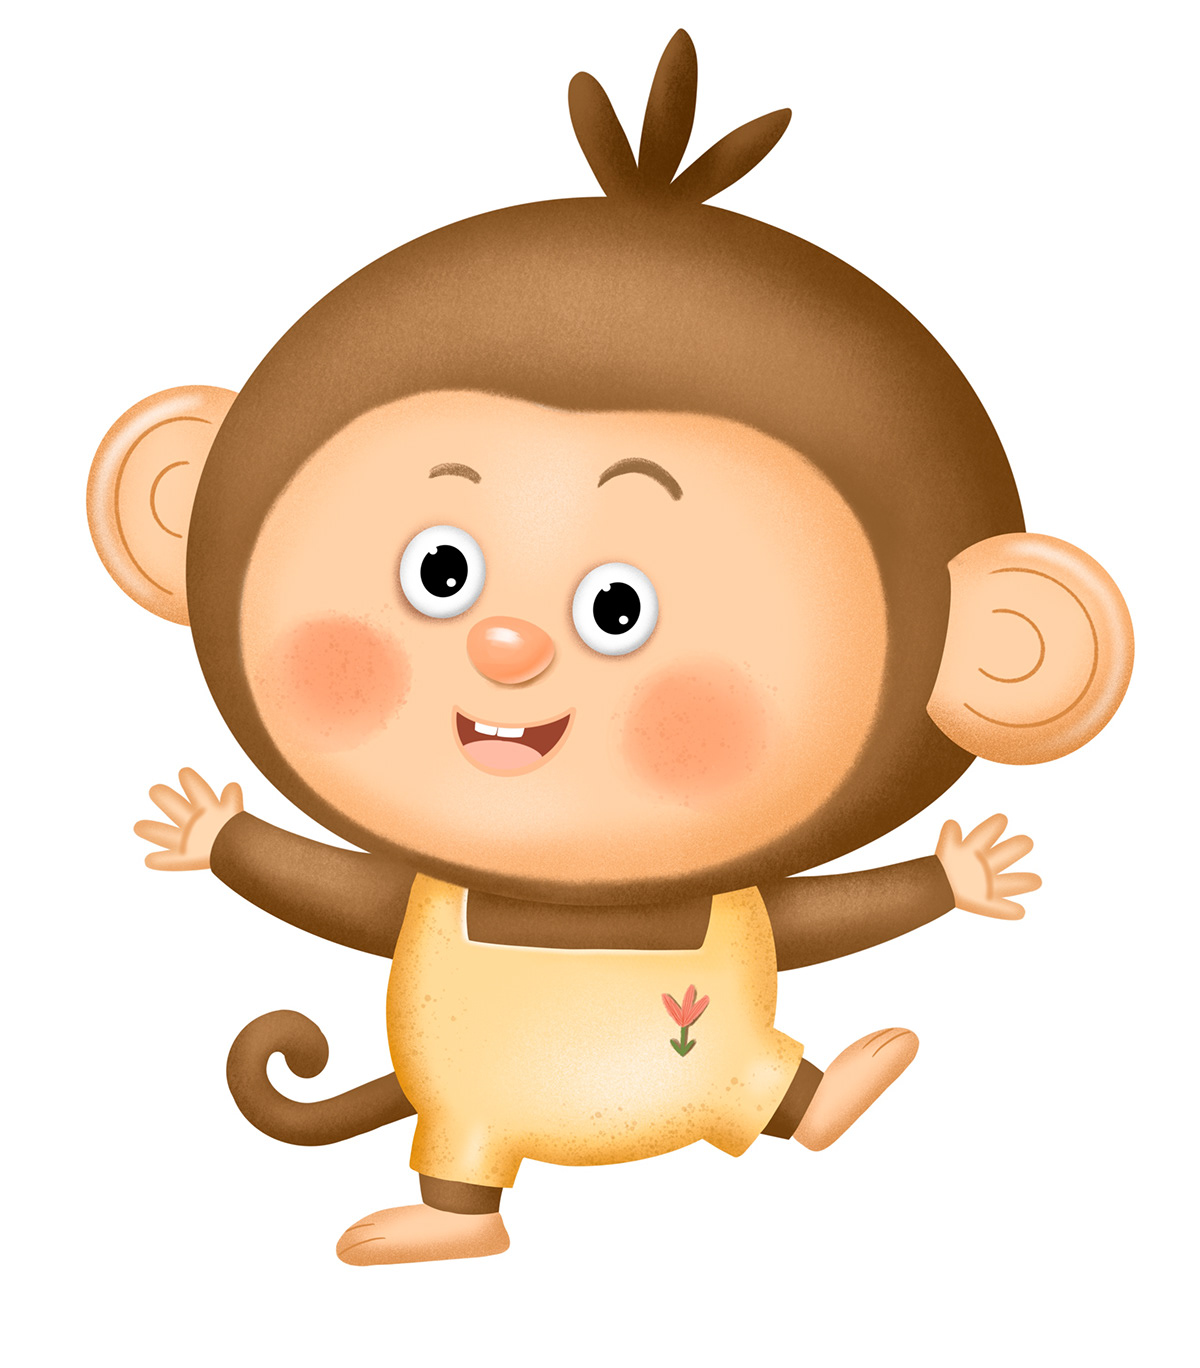 animal Character children illustration cute design digital illustration ILLUSTRATION  monkey childrensroom toy